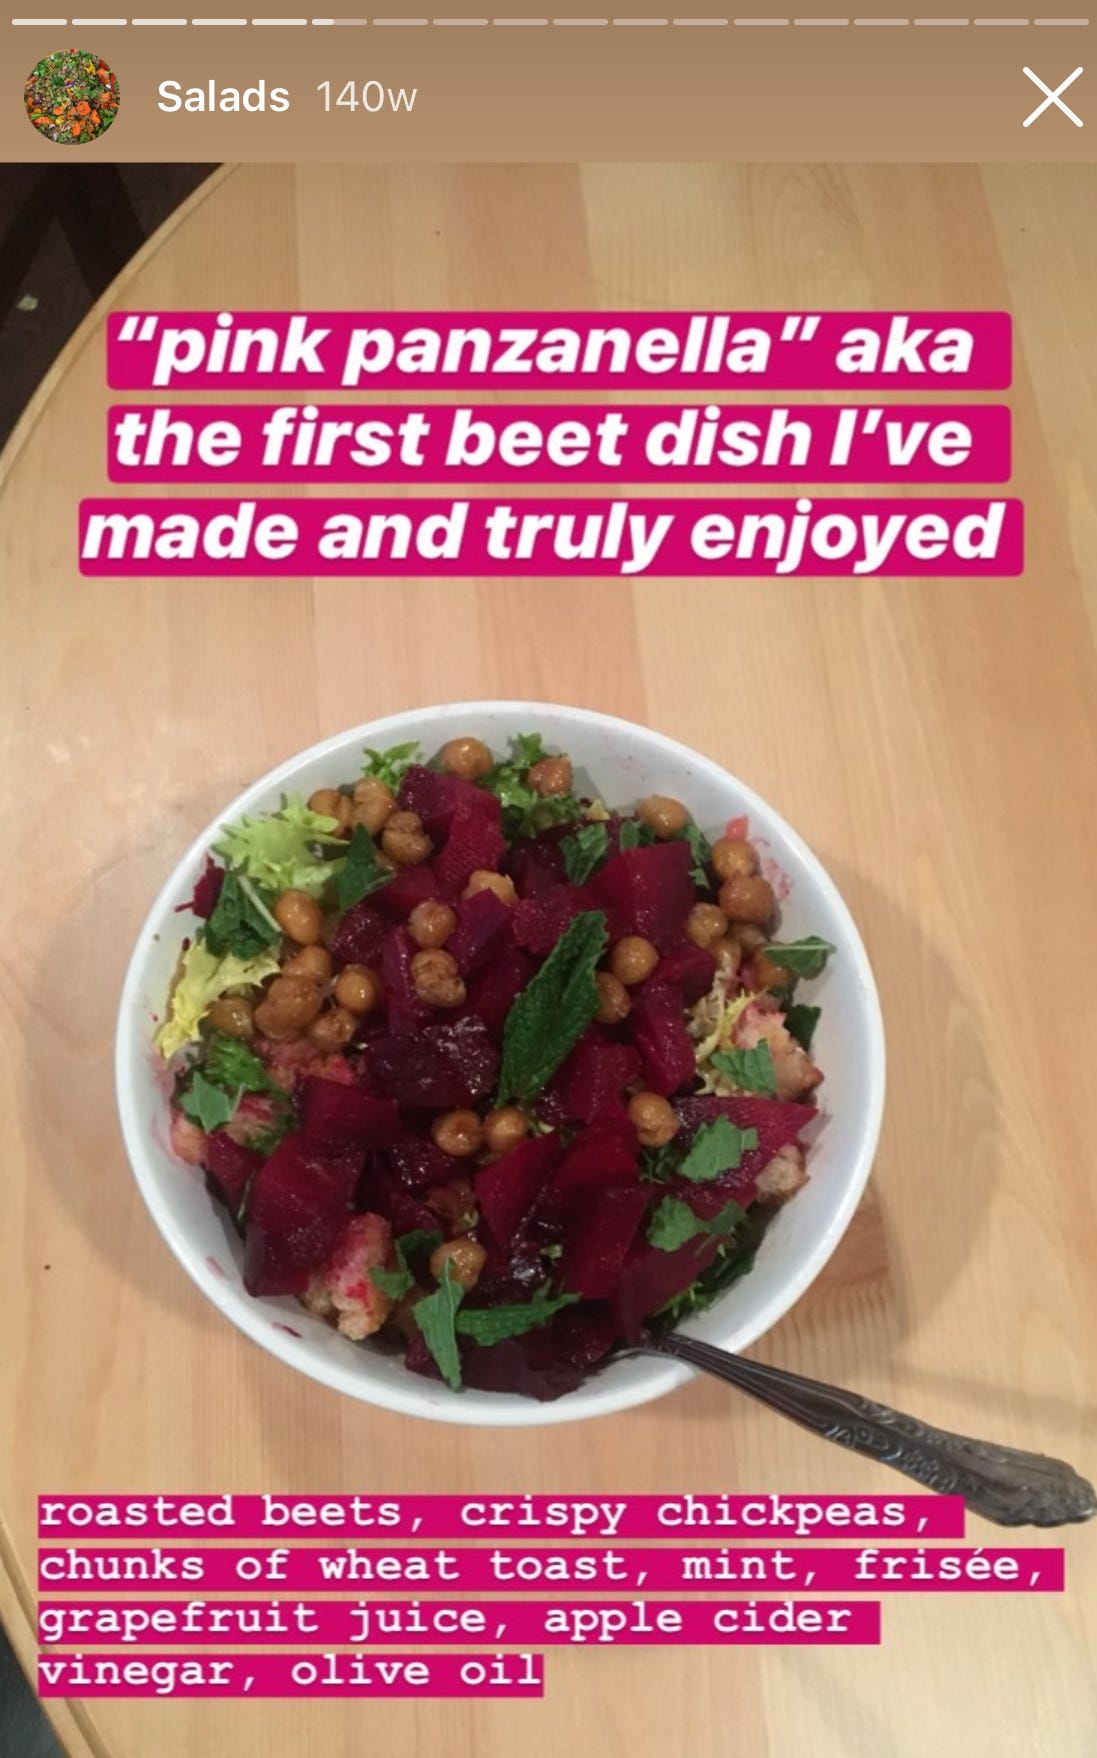 bowl of beet salad with caption "pink panzanella, aka the first beet dish i've made and truly enjoyed. roasted beets, crispy chickpeas, chunks of wheat toast, mint, frisee, grapefruit juice, apple cider vinegar, olive oil"